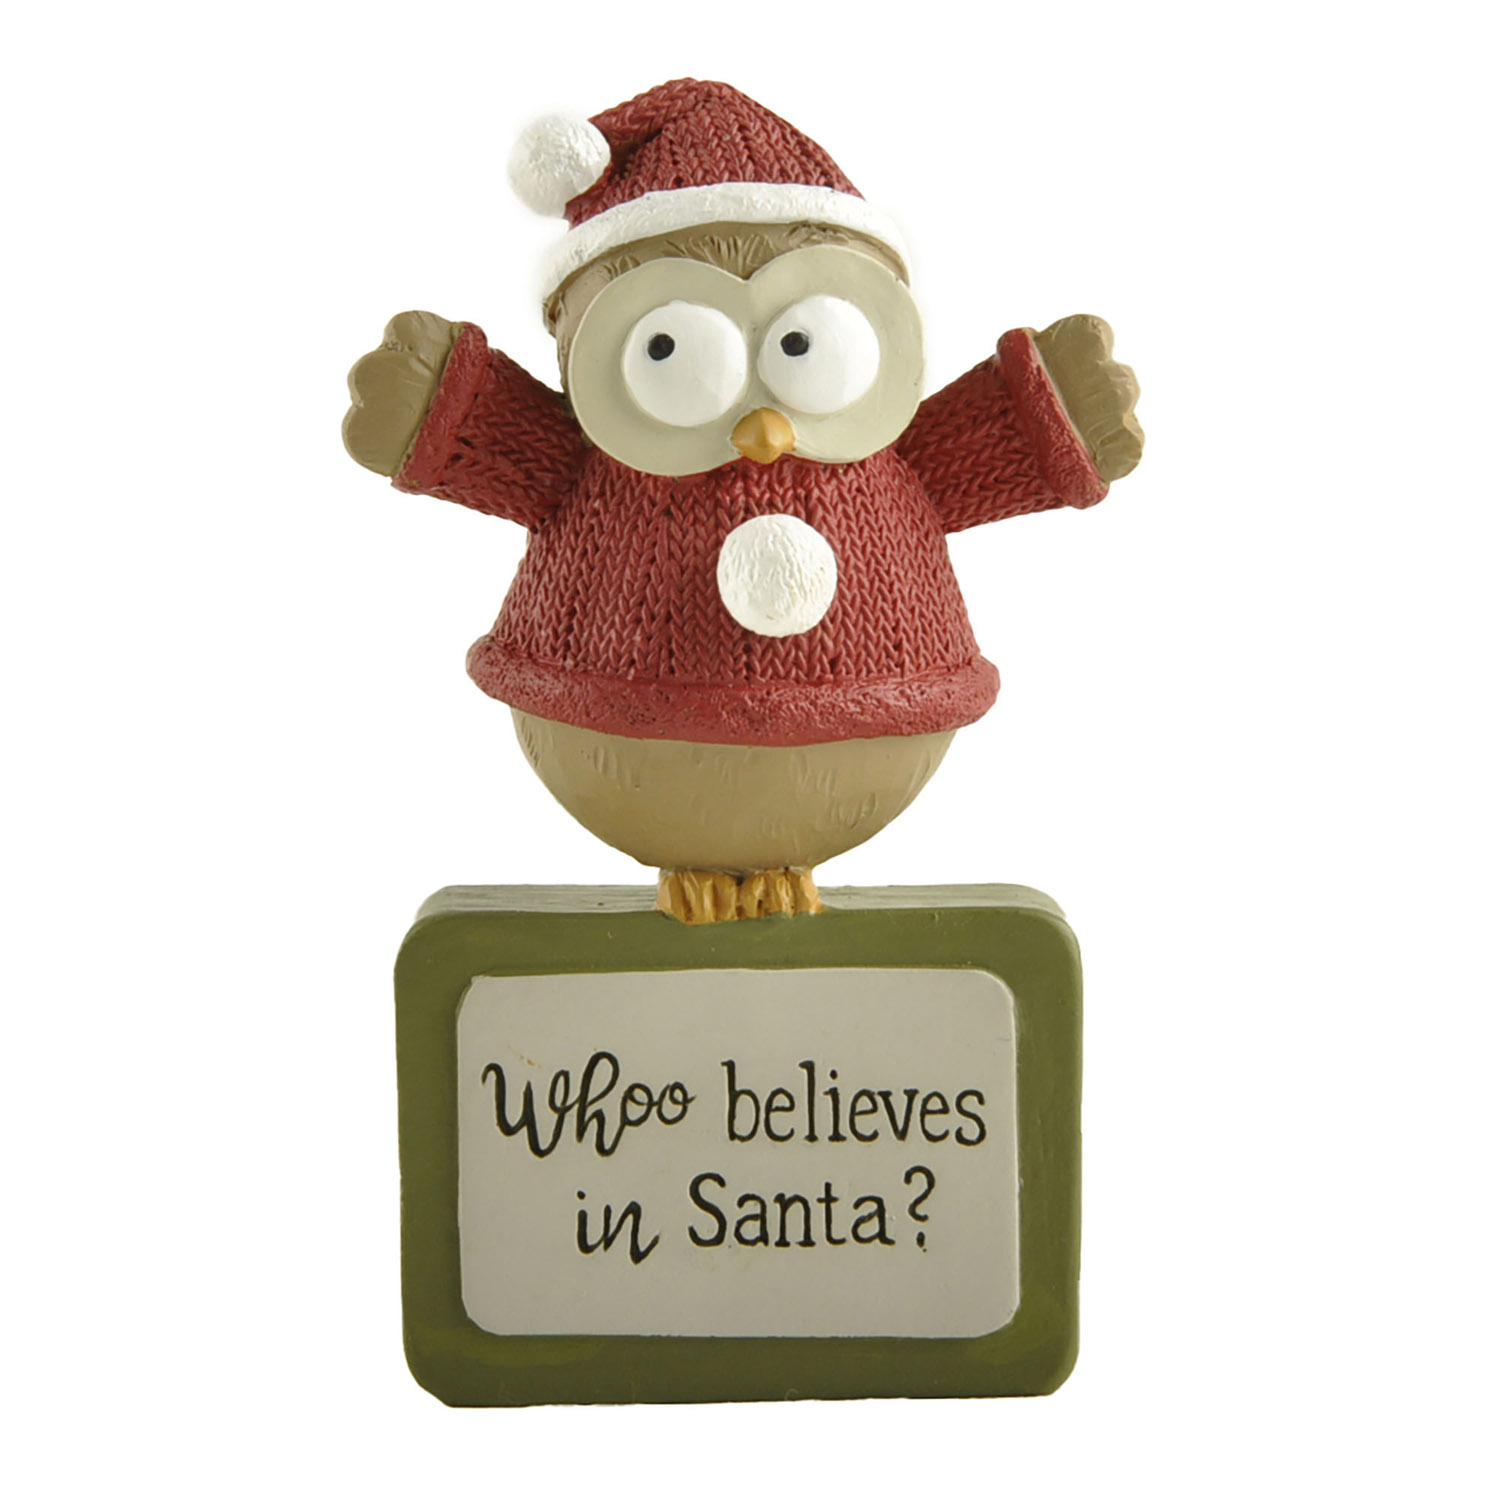 Festive Resin Owl Figurine with 'Whoo Believes in Santa?' Inscription – Cute Christmas Decoration for Holiday Cheer 238-13896